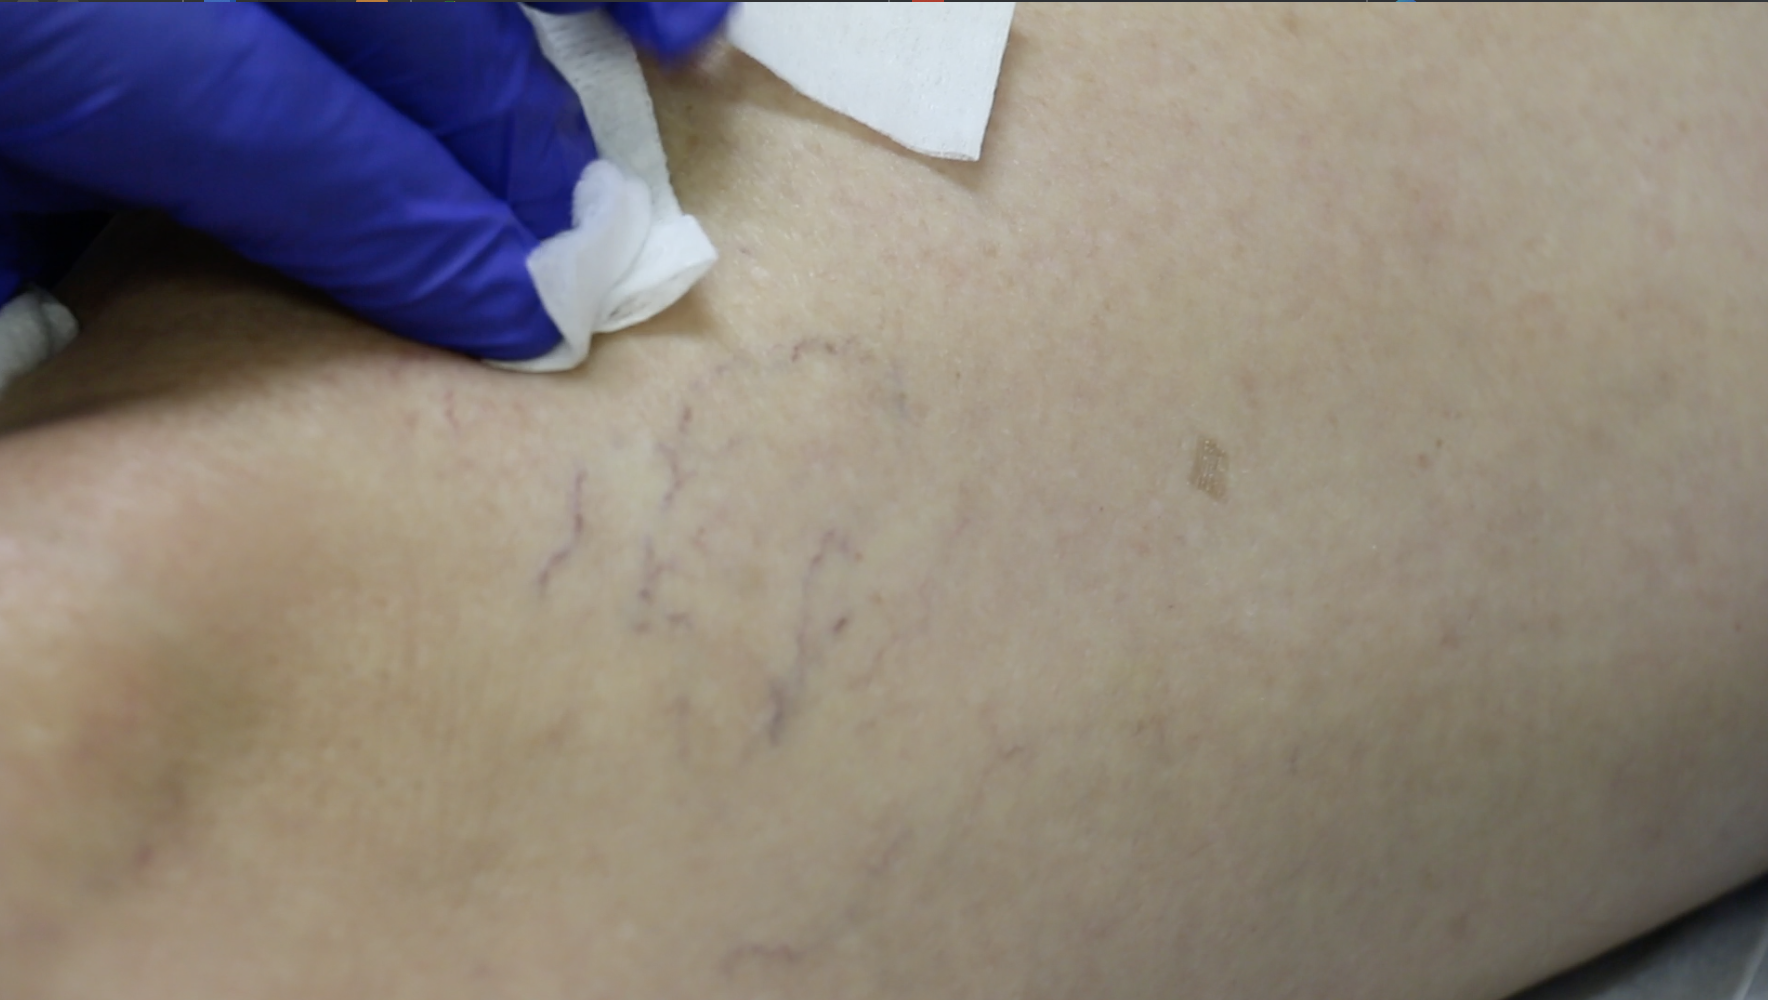 Side effects of sclerotherapy for varicose veins include bruising and sore spots